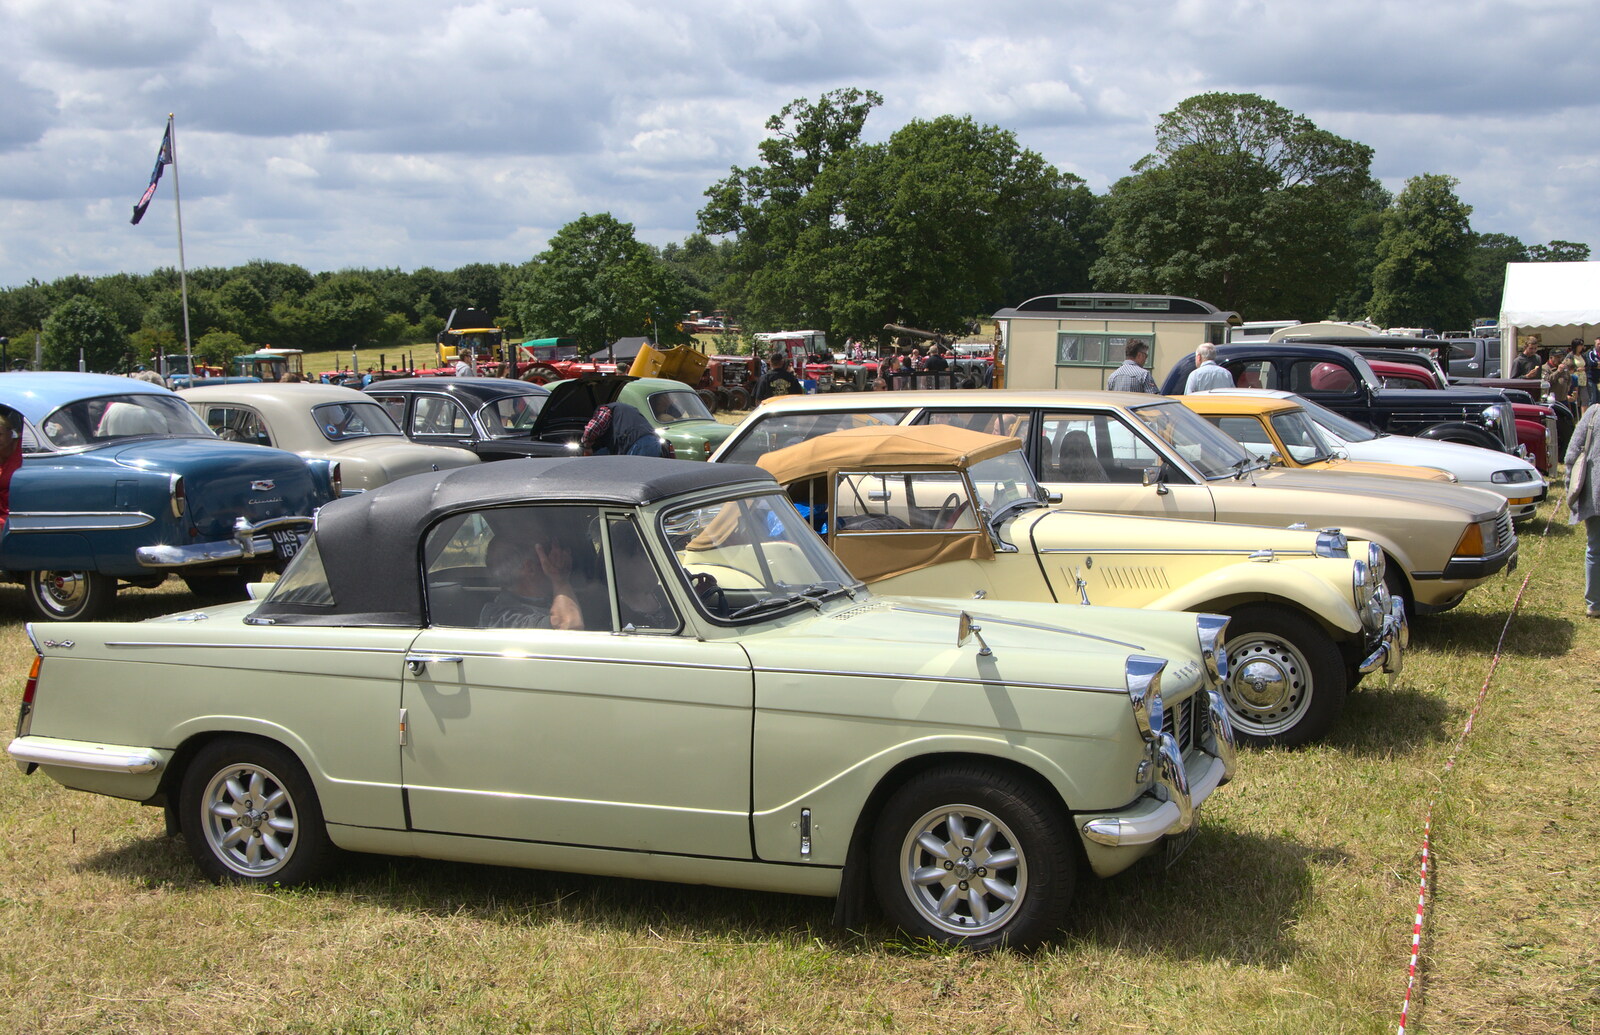 Classic cars from A Vintage Tractorey Sort of Day, Palgrave, Suffolk - 21st June 2015